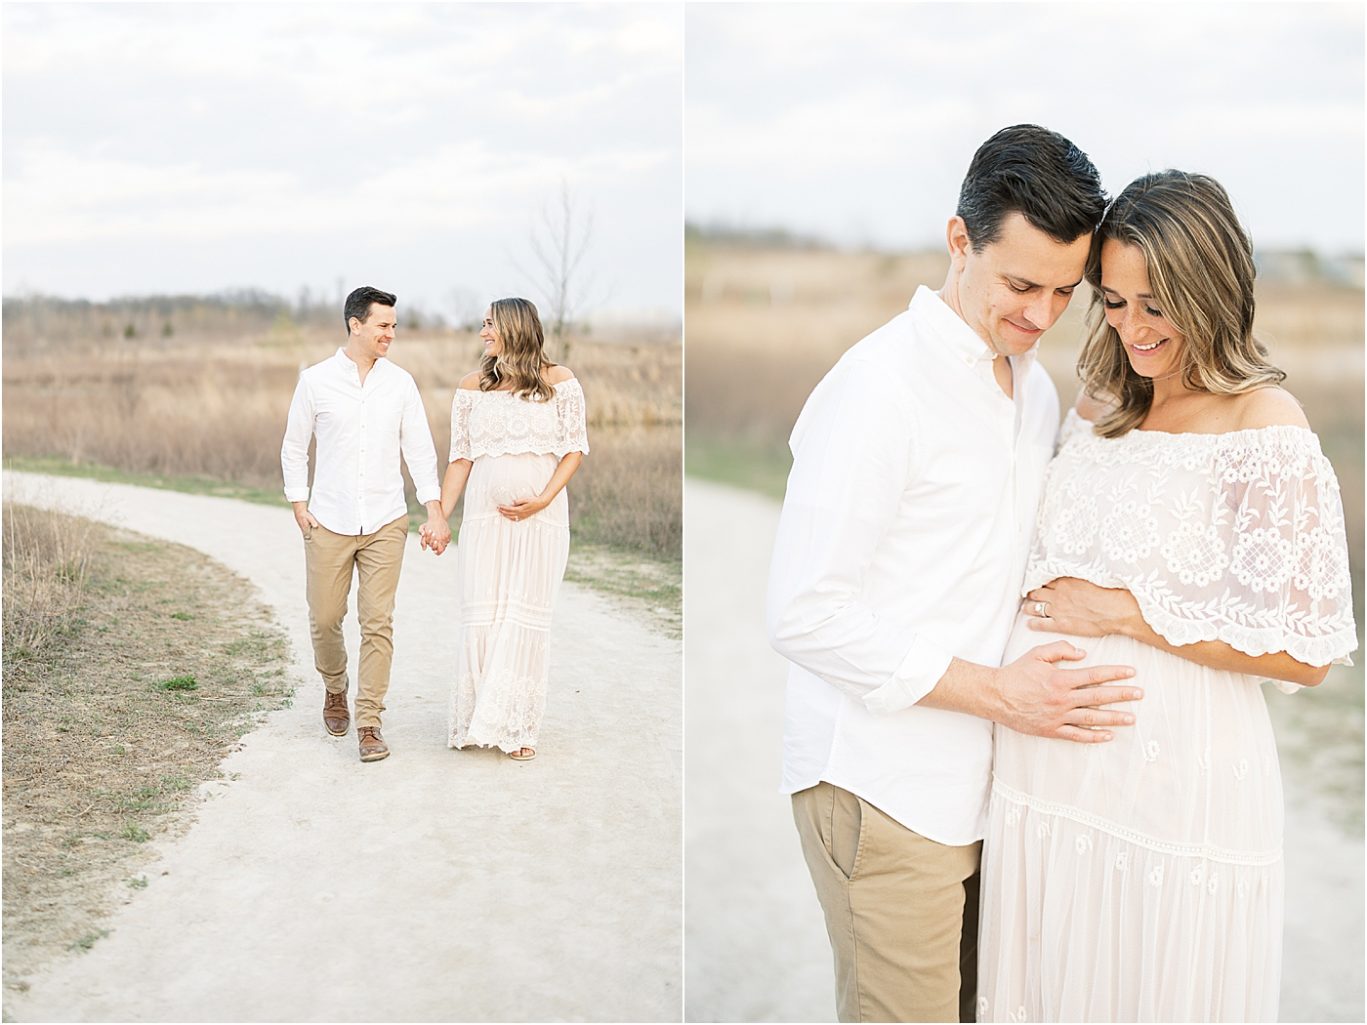 Outdoor maternity session in Broad Ripple Indiana. Photo by Lindsay Konopa Photography.